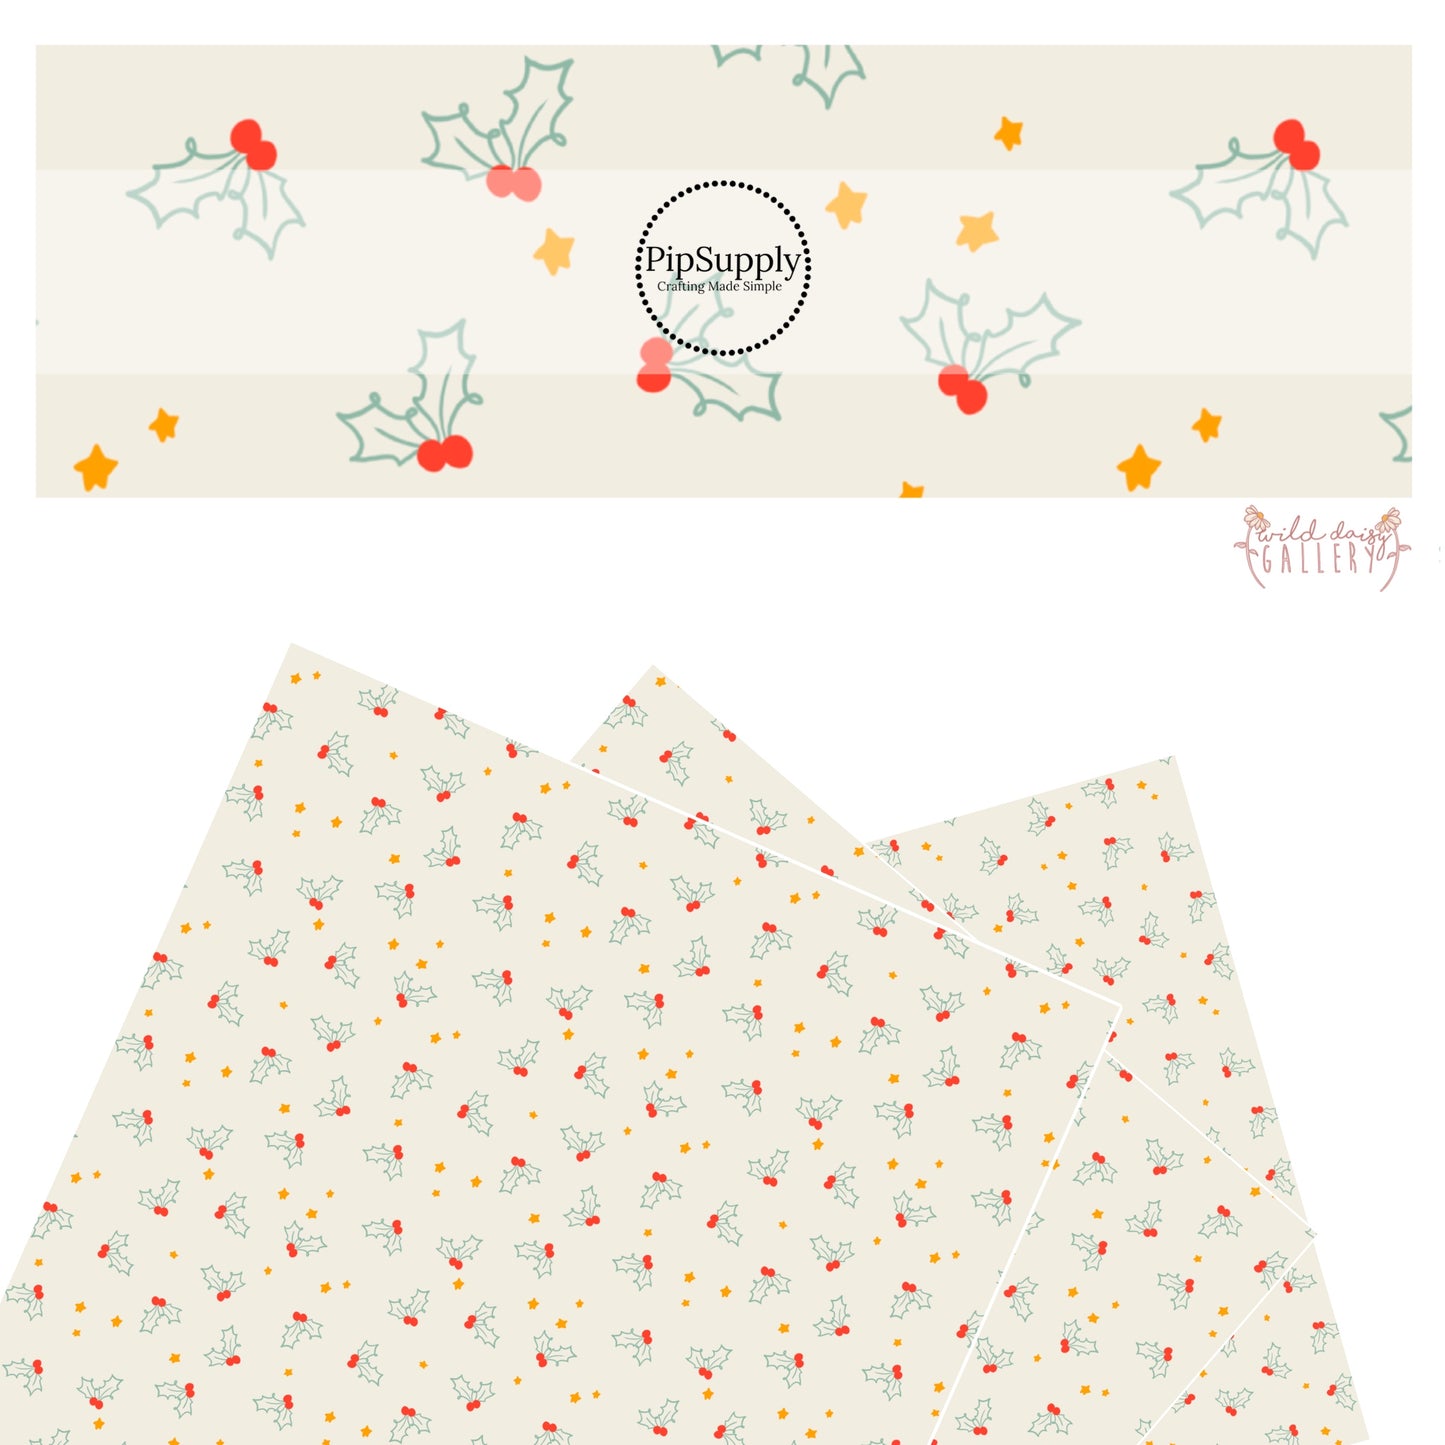 Holly leaves with red berries and yellow stars on cream faux leather sheets